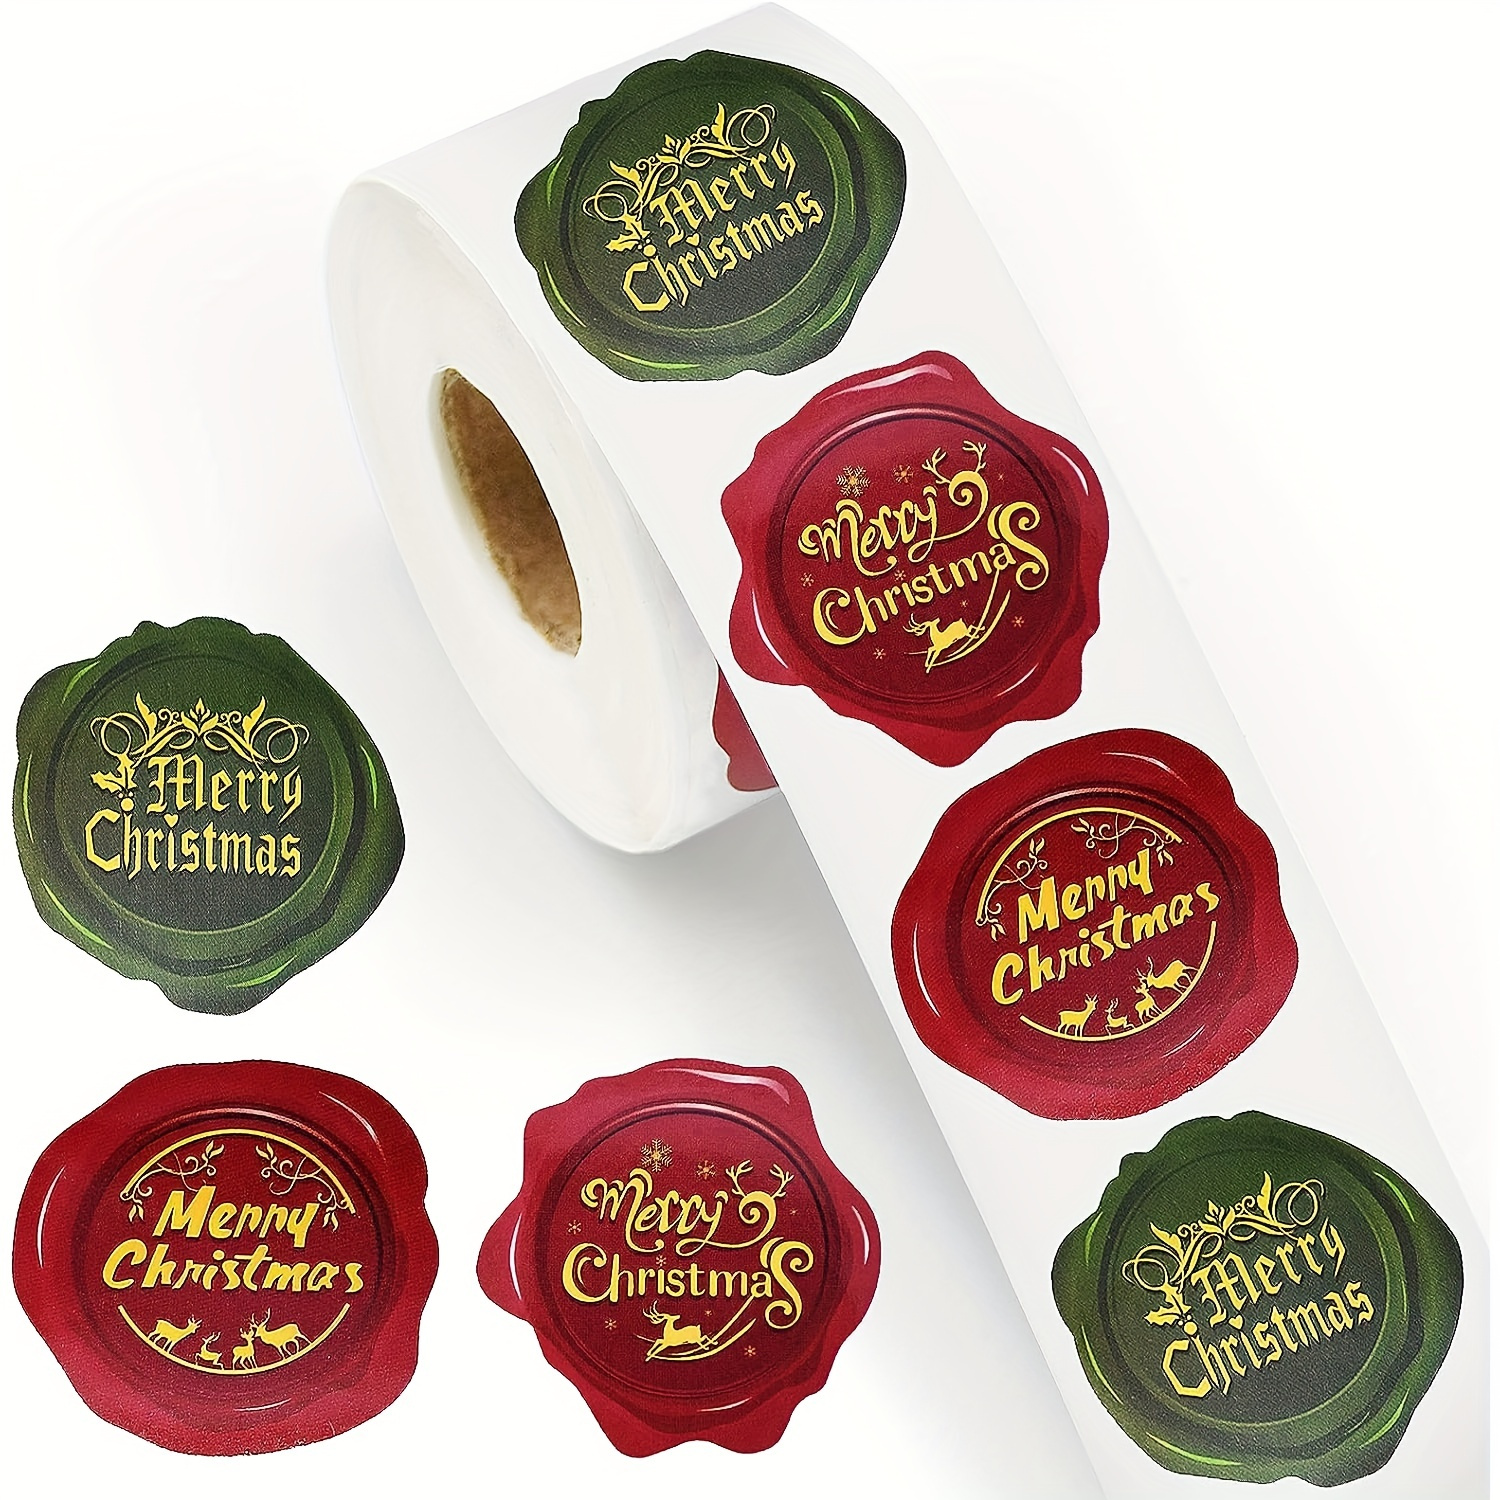 

1 Roll 500 Pieces 1.5 Inch/3.8cm Christmas Stickers Roll For Envelope - 3 Designs Stamp Shape Round Merry Christmas Sticke For Holiday Greeting, Sealing, Gifting, Gift Decorations